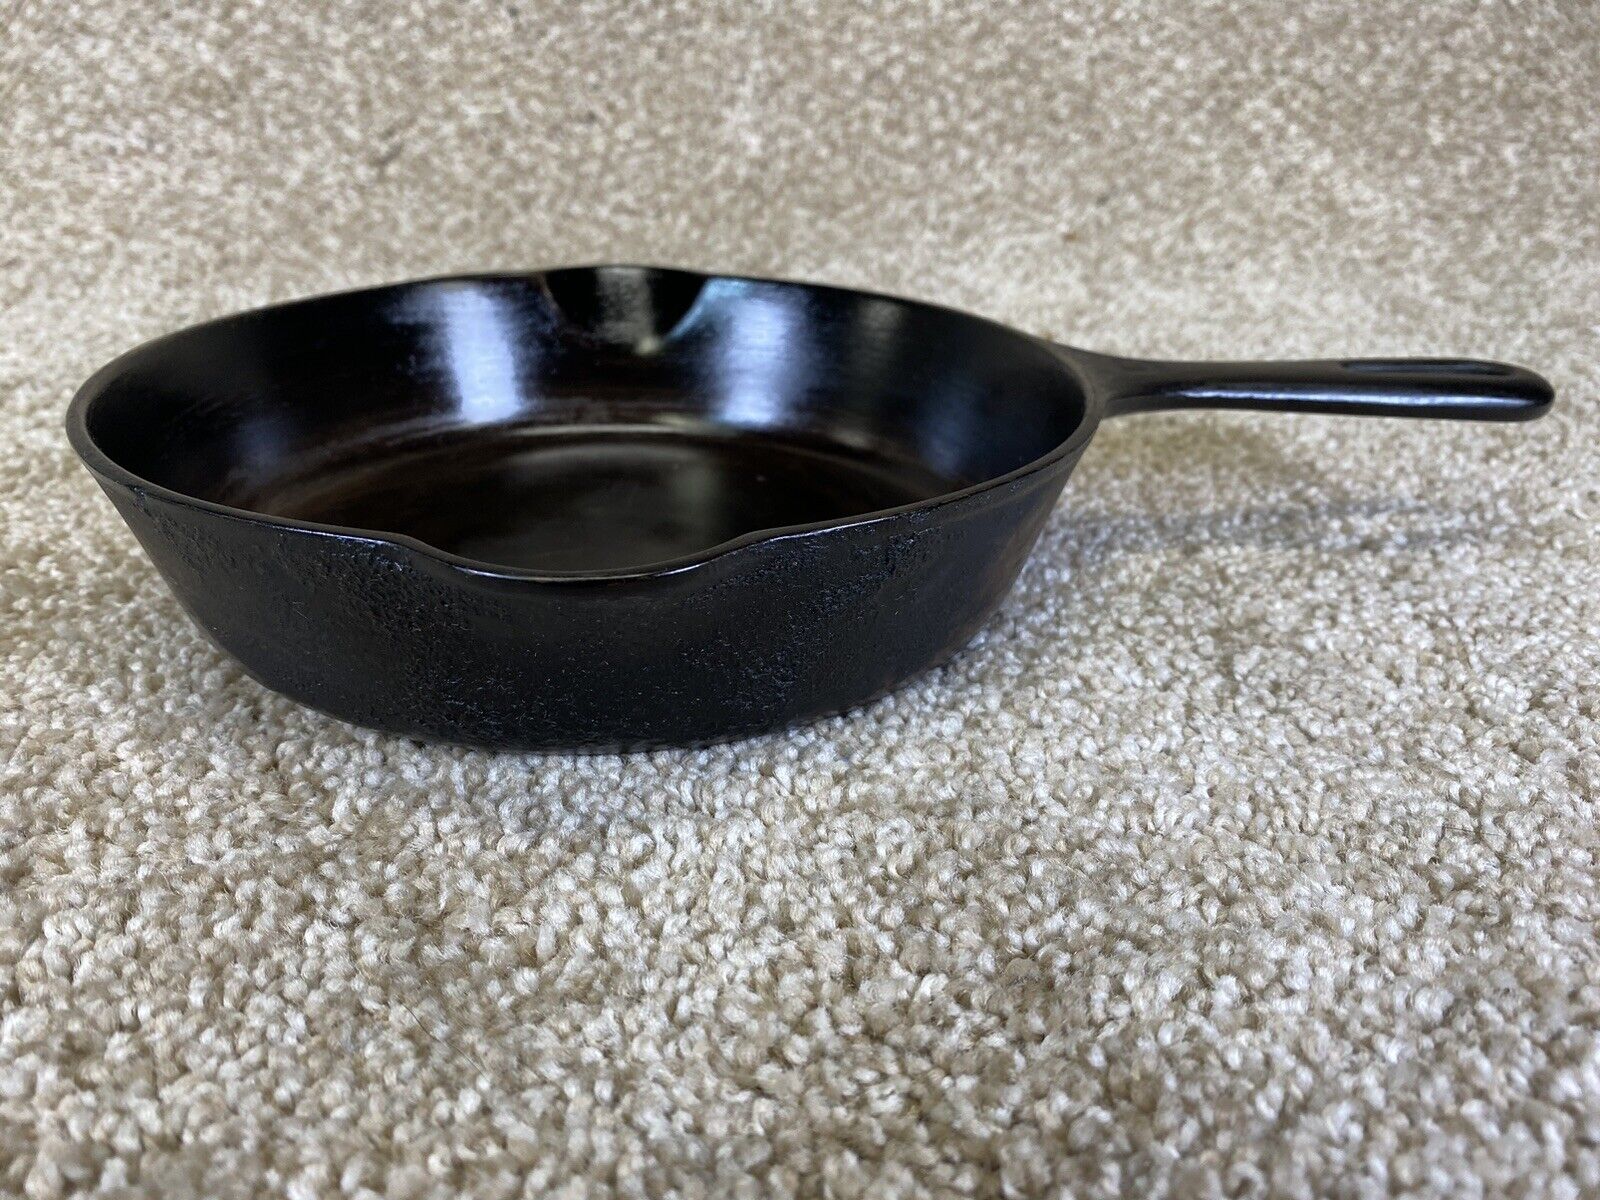 Griswold No.5 Grooved Handle Cast Iron Skillet 724 M Circa 1944 - 1957 Seasoned